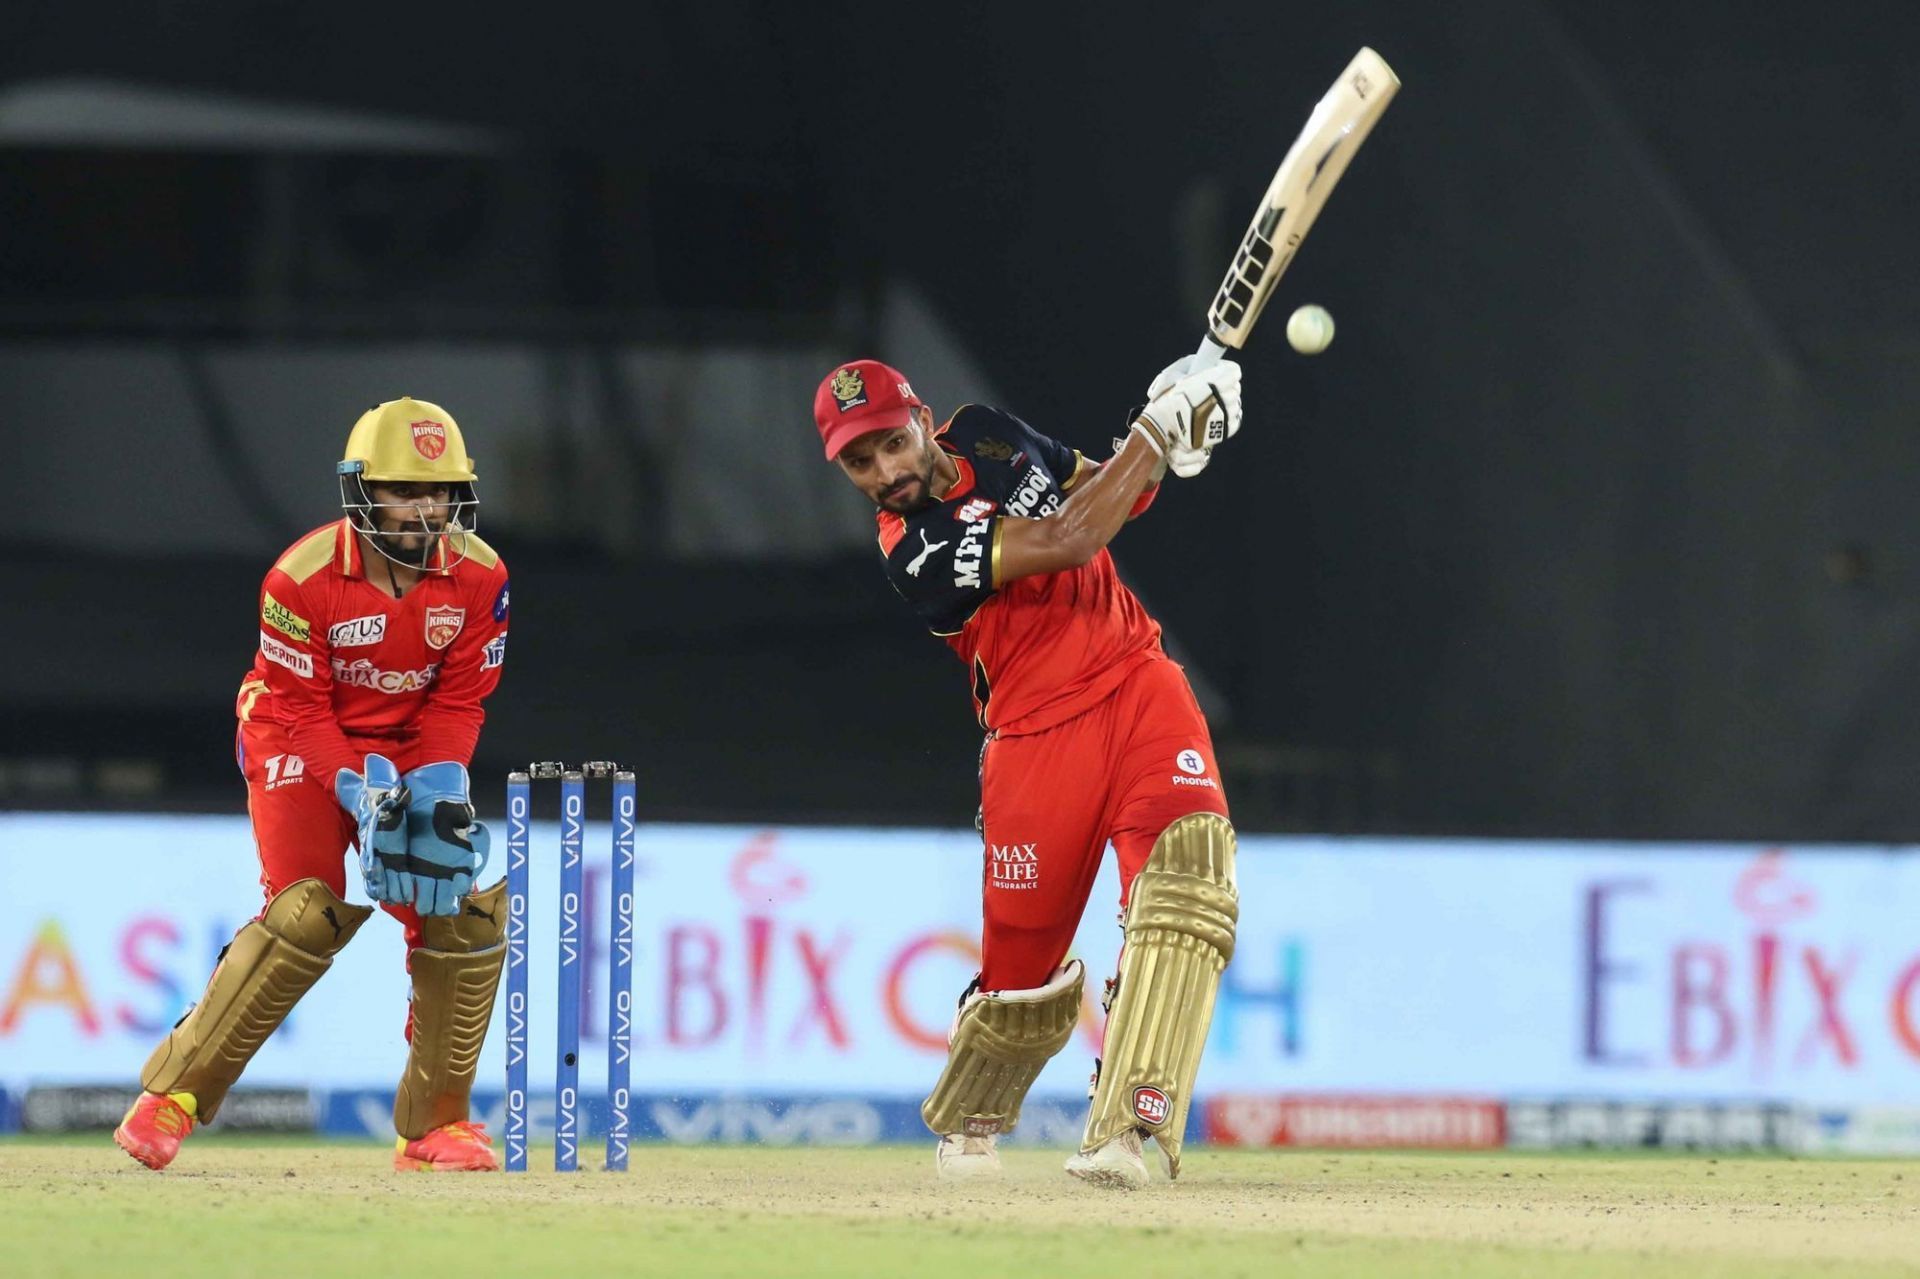 Rajit Patidar got a first taste of the IPL this year, playing for the Royal Challengers Bangalore (Picture Credits: Deepak Malik/Sportzpics/IPL)